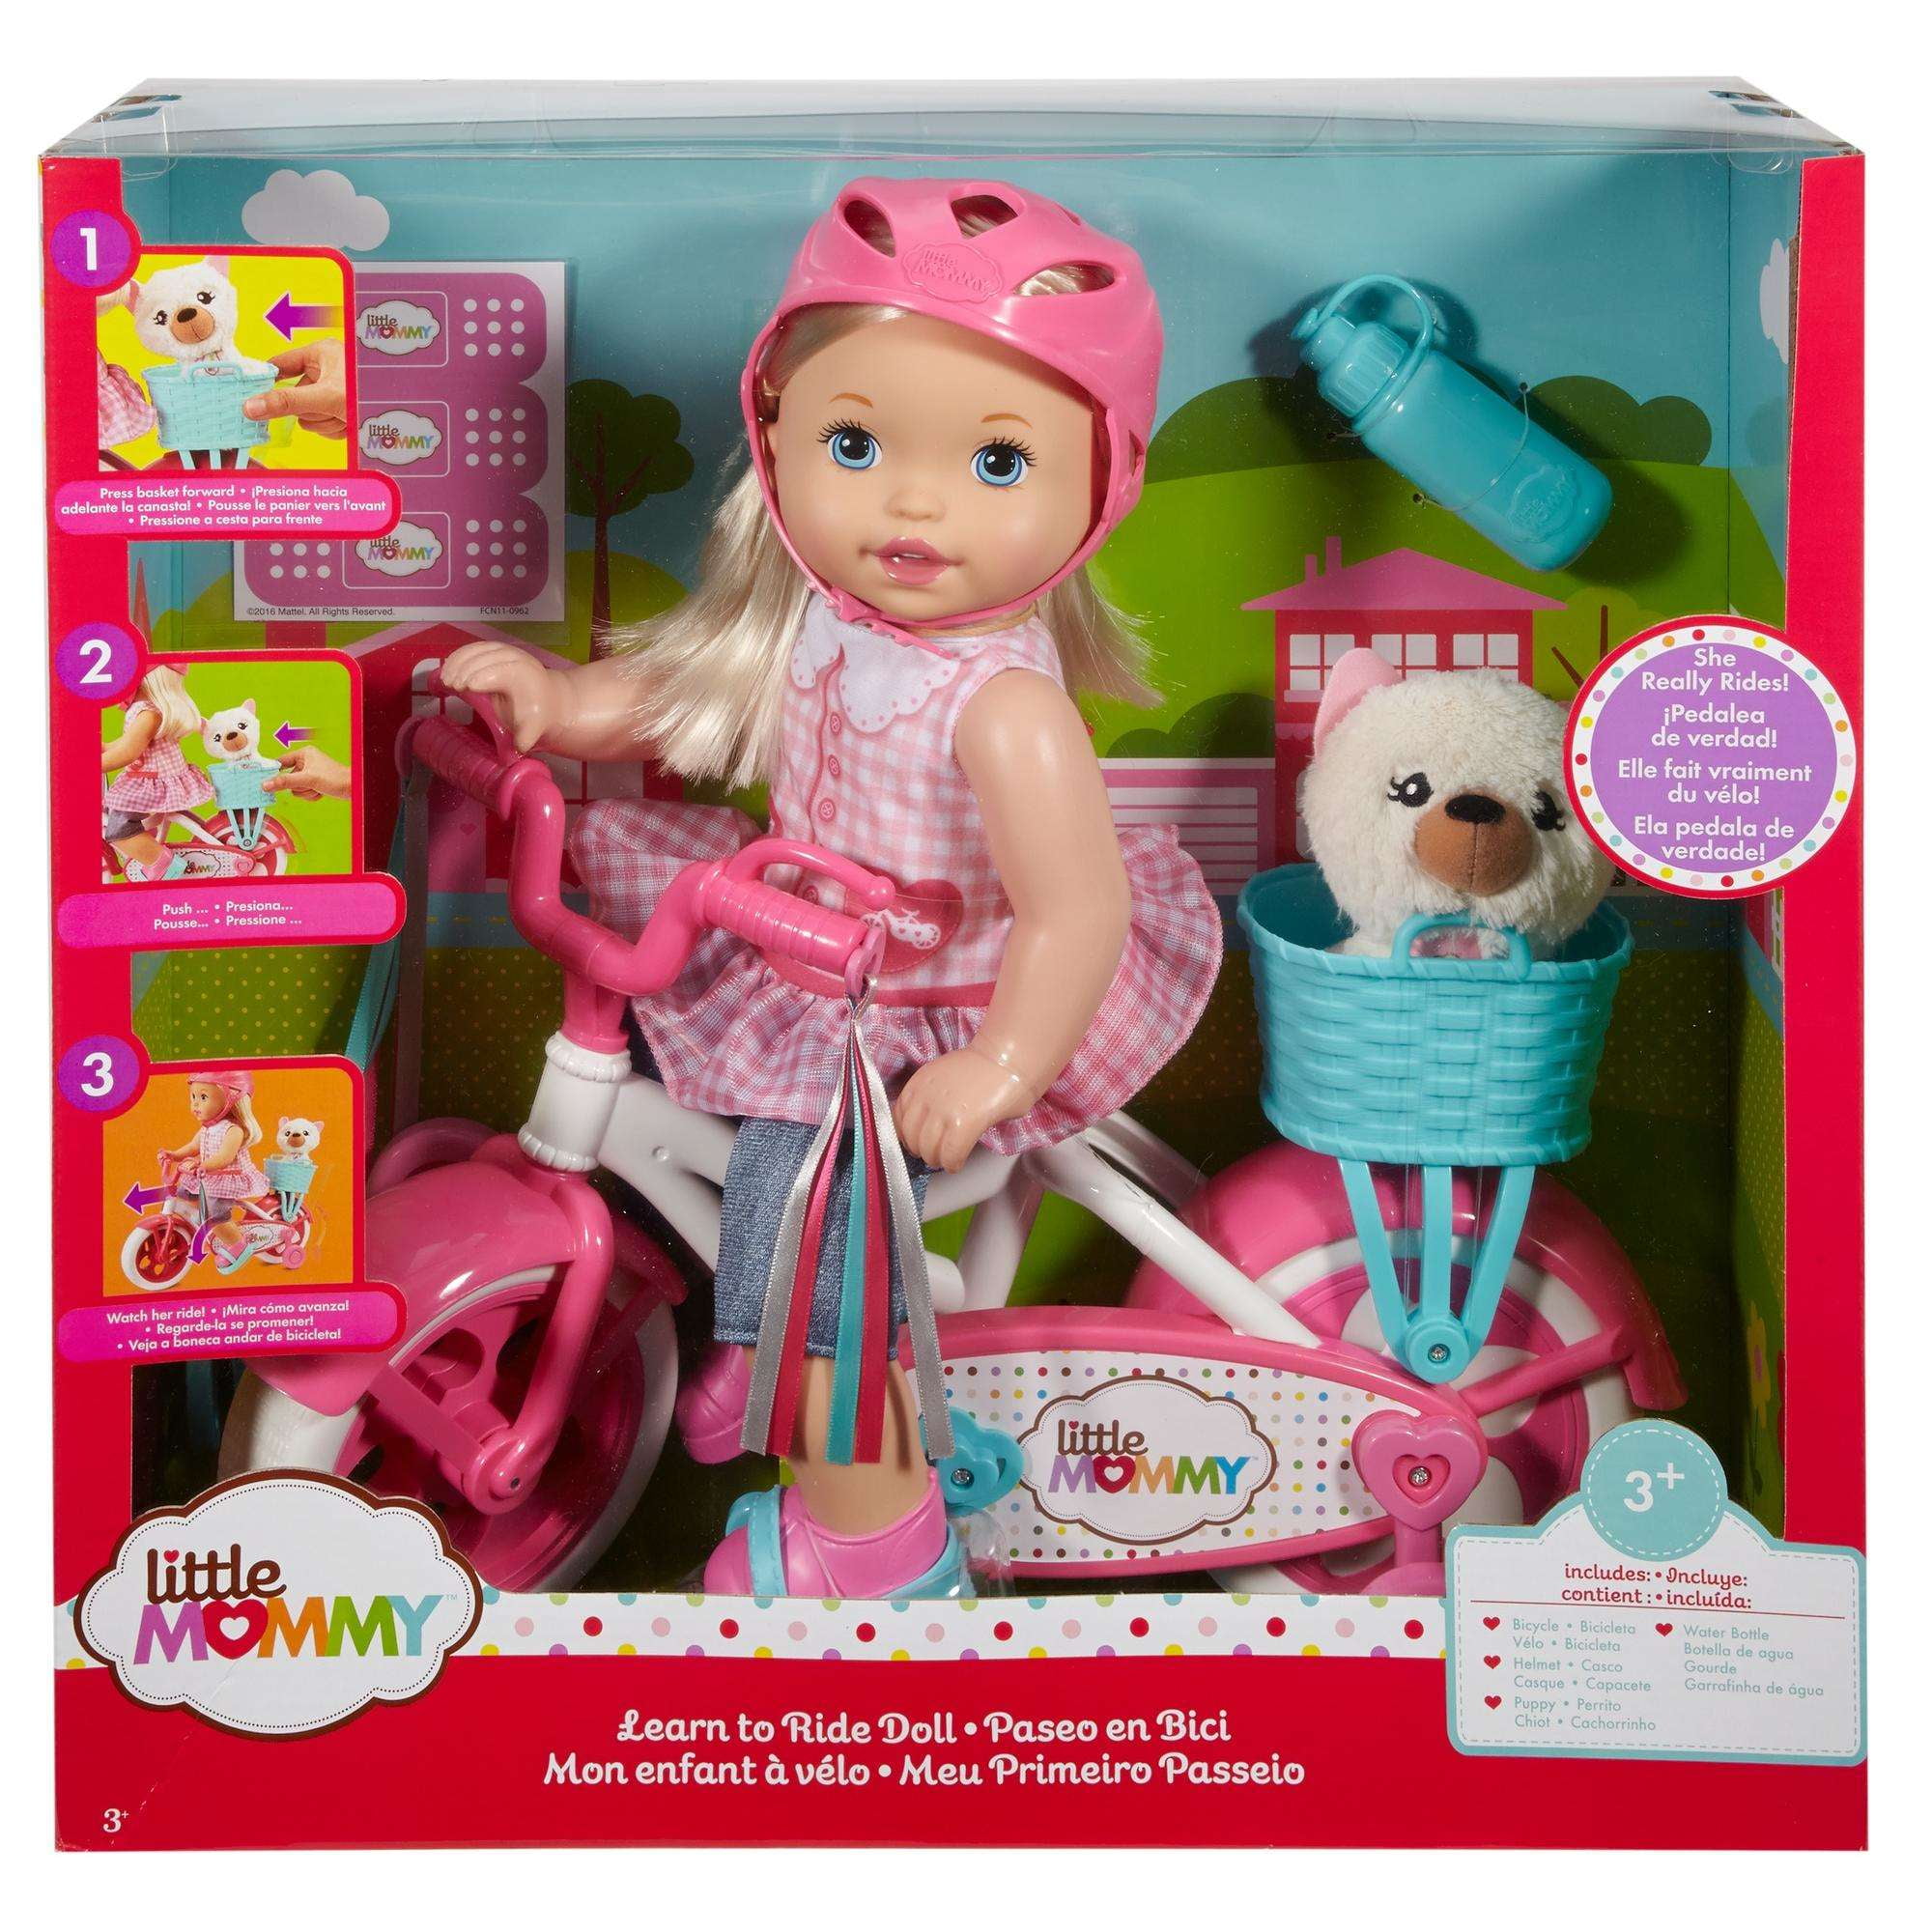 To Ride Doll with Pink Training Bicycle 